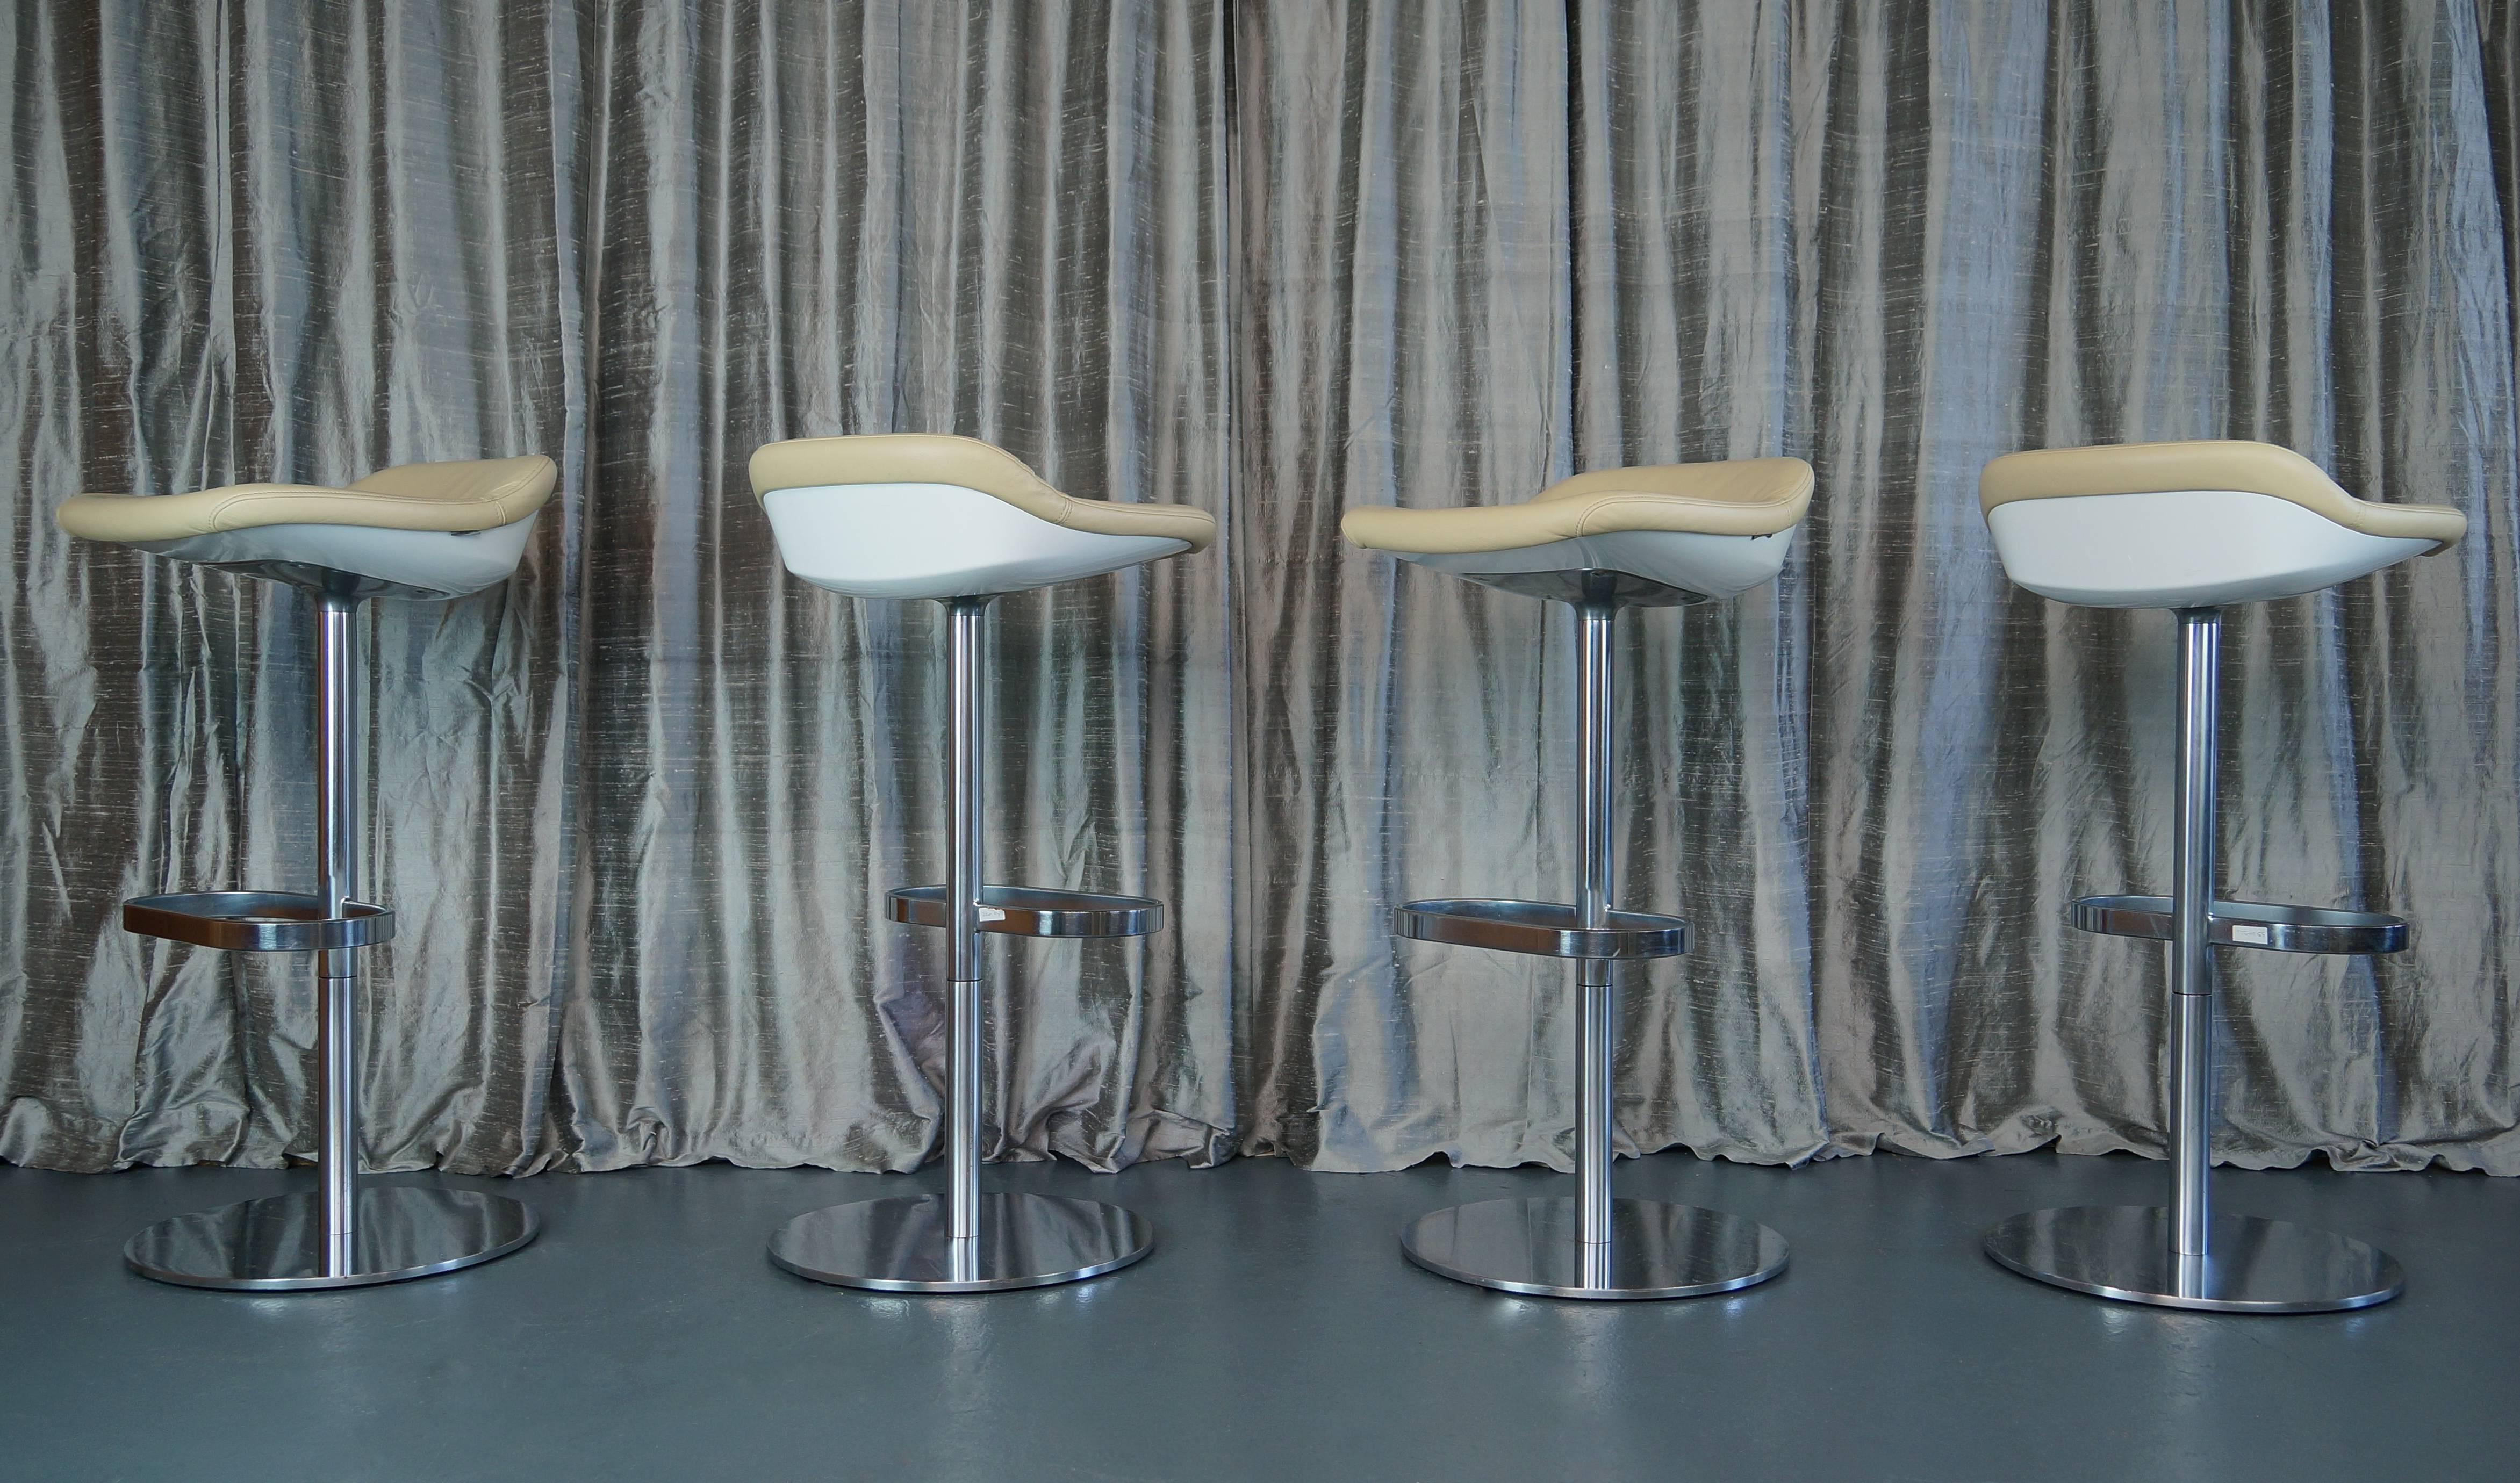 Walter Knoll ‘Turtle’ bar stools by Pearson Lloyd - Set of four ( up to 6 Available)

Design year: 2005
Designer: Luke Pearson, Tom Lloyd renowned London design team
Maker: Walter Knoll

These sleek, compact bar stools have a hard outer shell